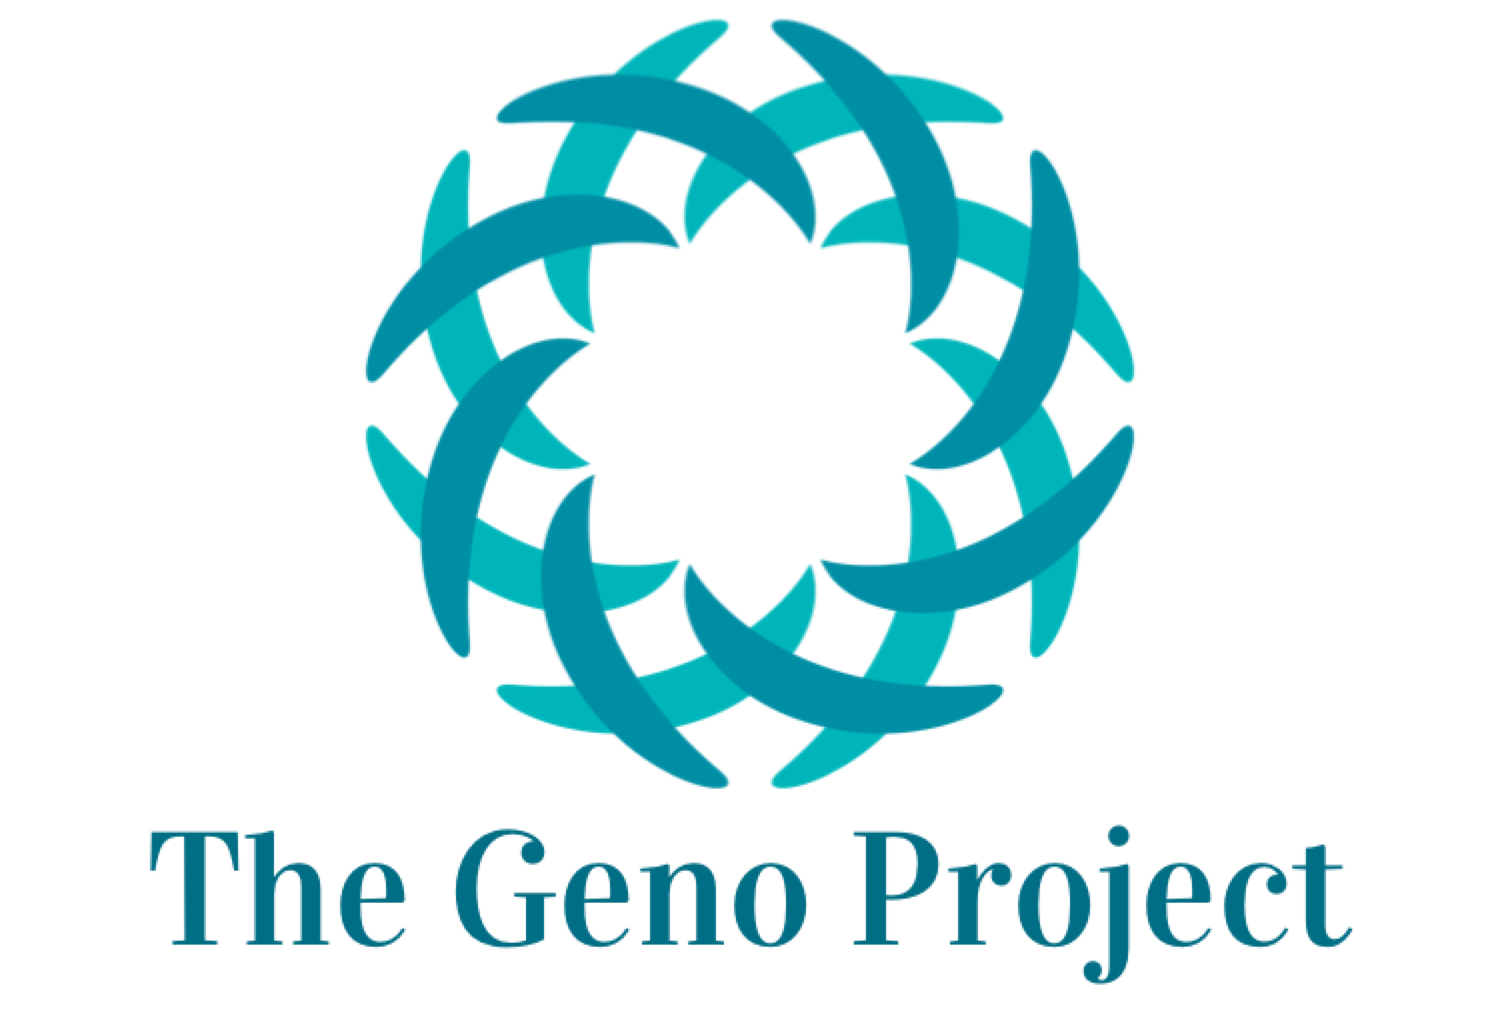 The Geno Project